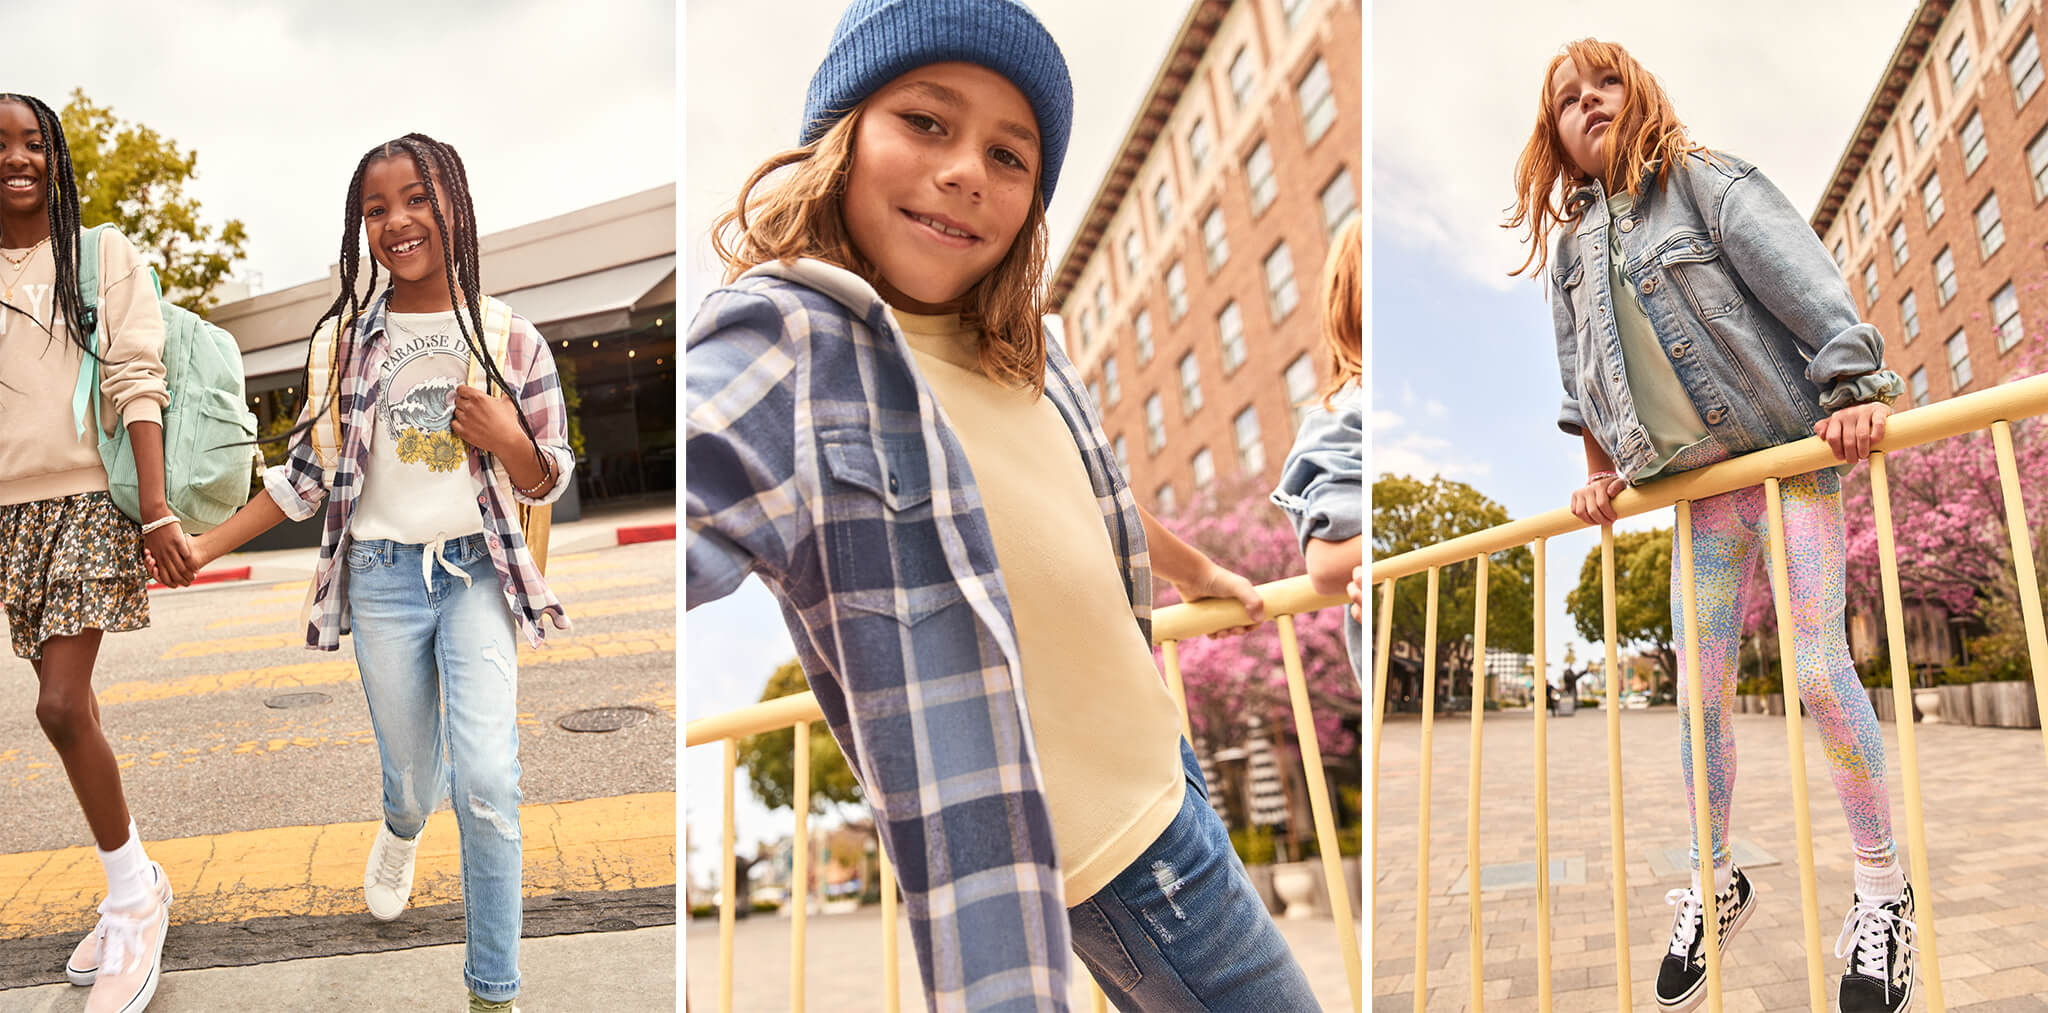 back to school outfits featuring flannel shirts, denim jackets, and leggings